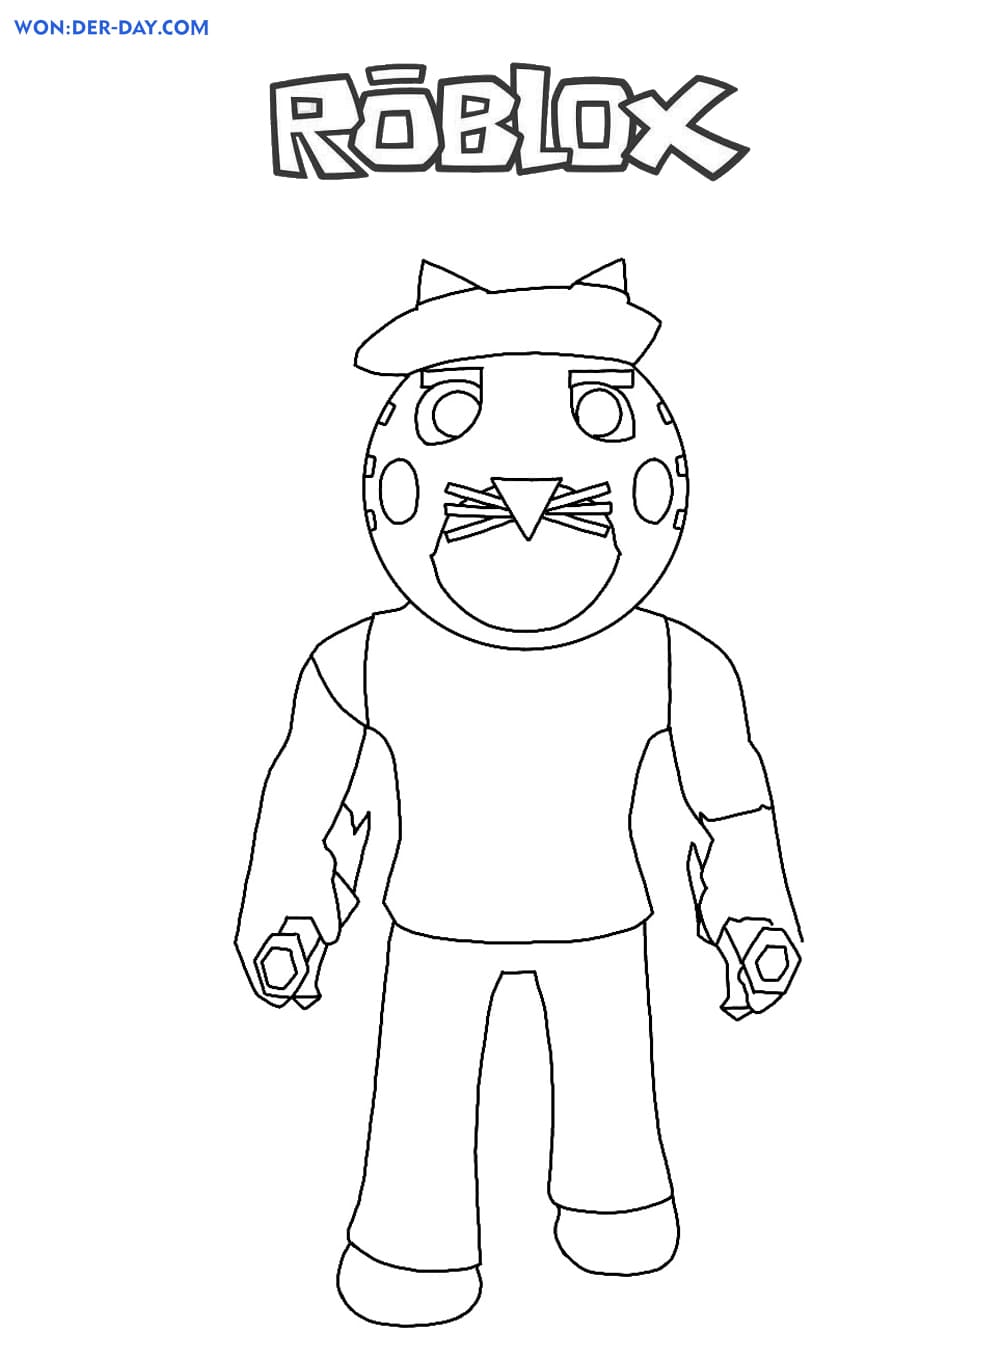 piggy roblox coloring pages wonder day coloring pages for children and adults